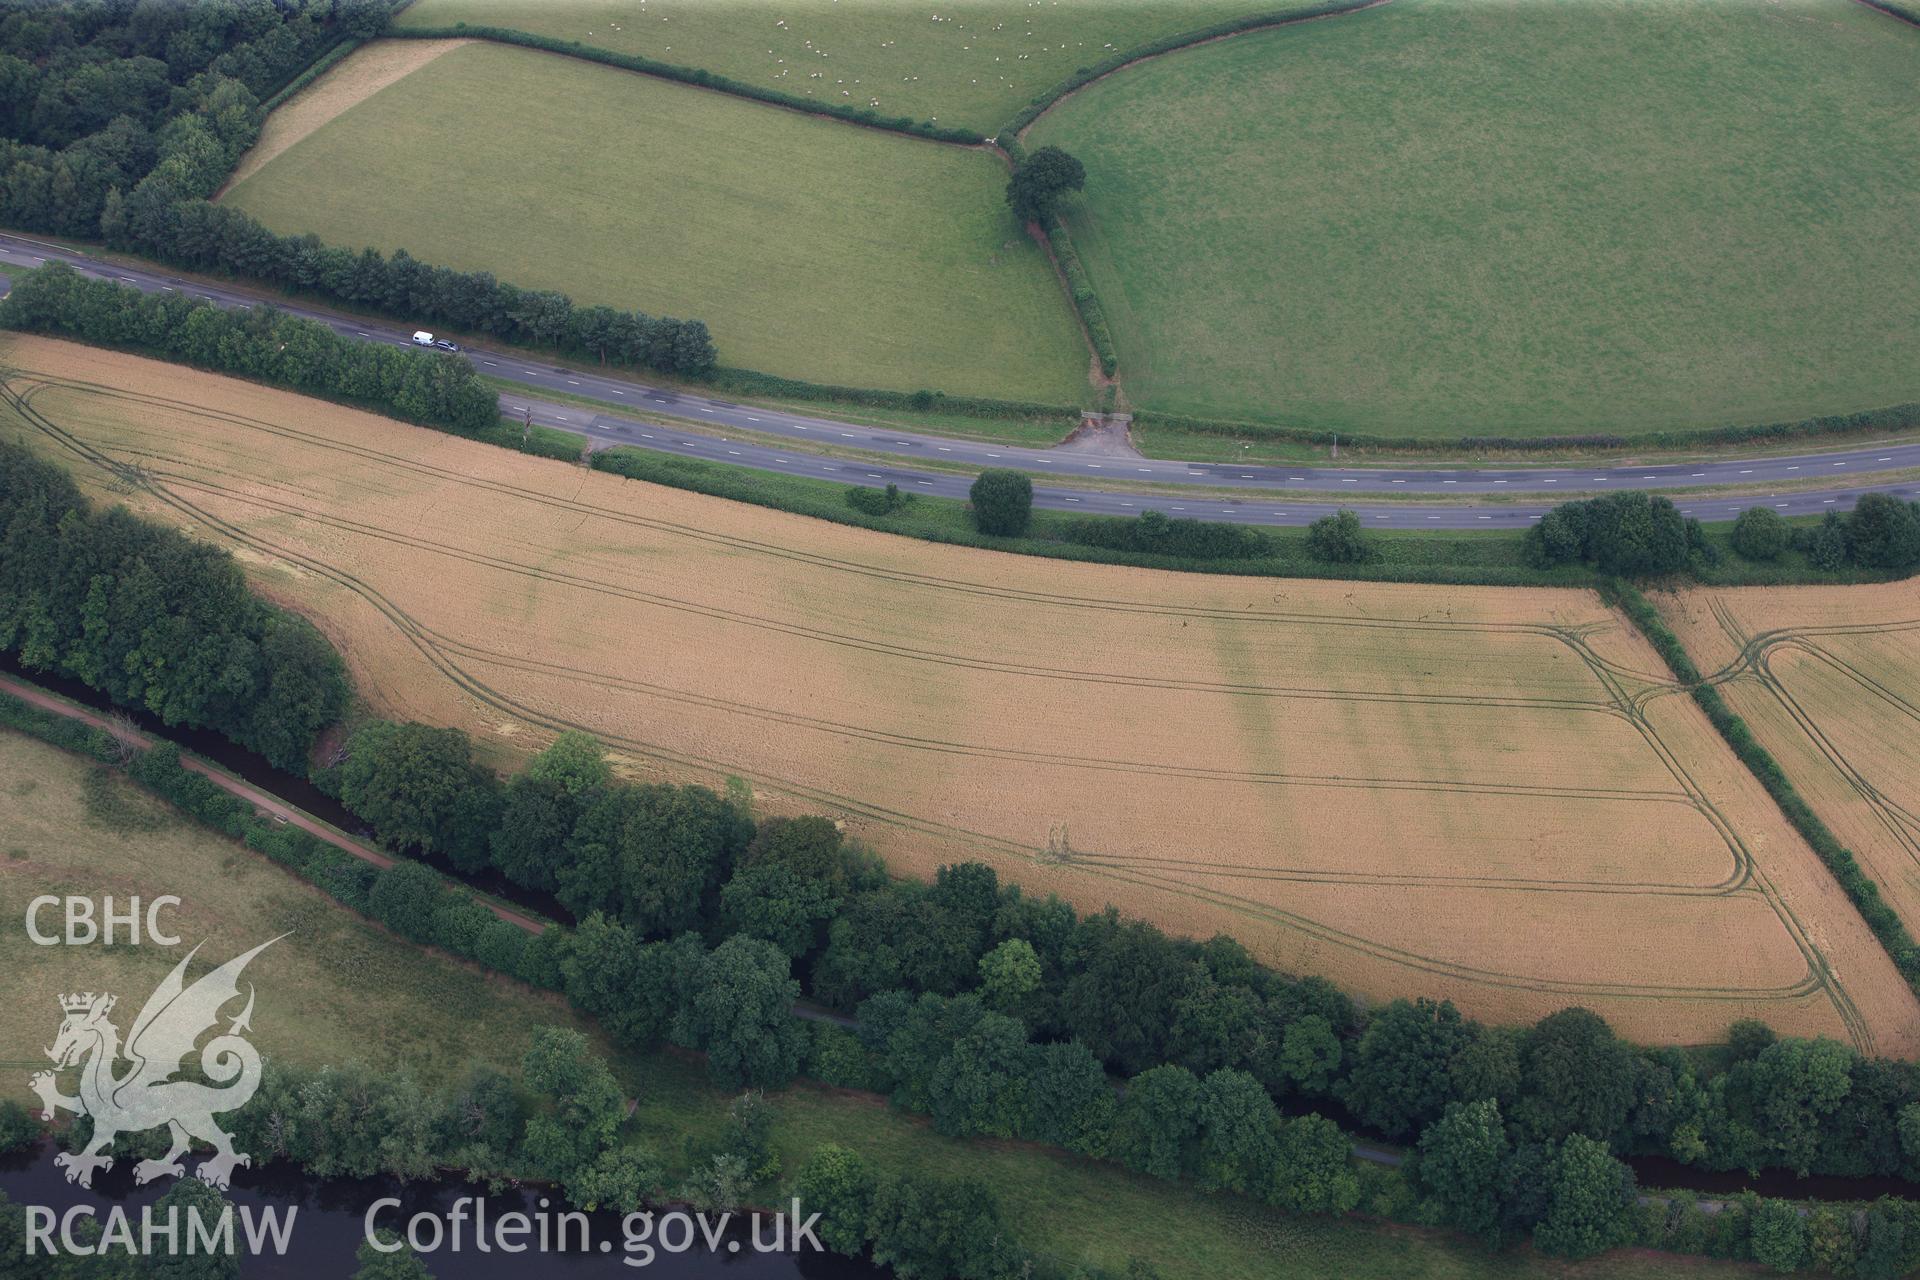 Cefn-brynich Roman fort, detailed view of cropmarks of Roman fort ditches from south, taken by RCAHMW 1st August 2013.